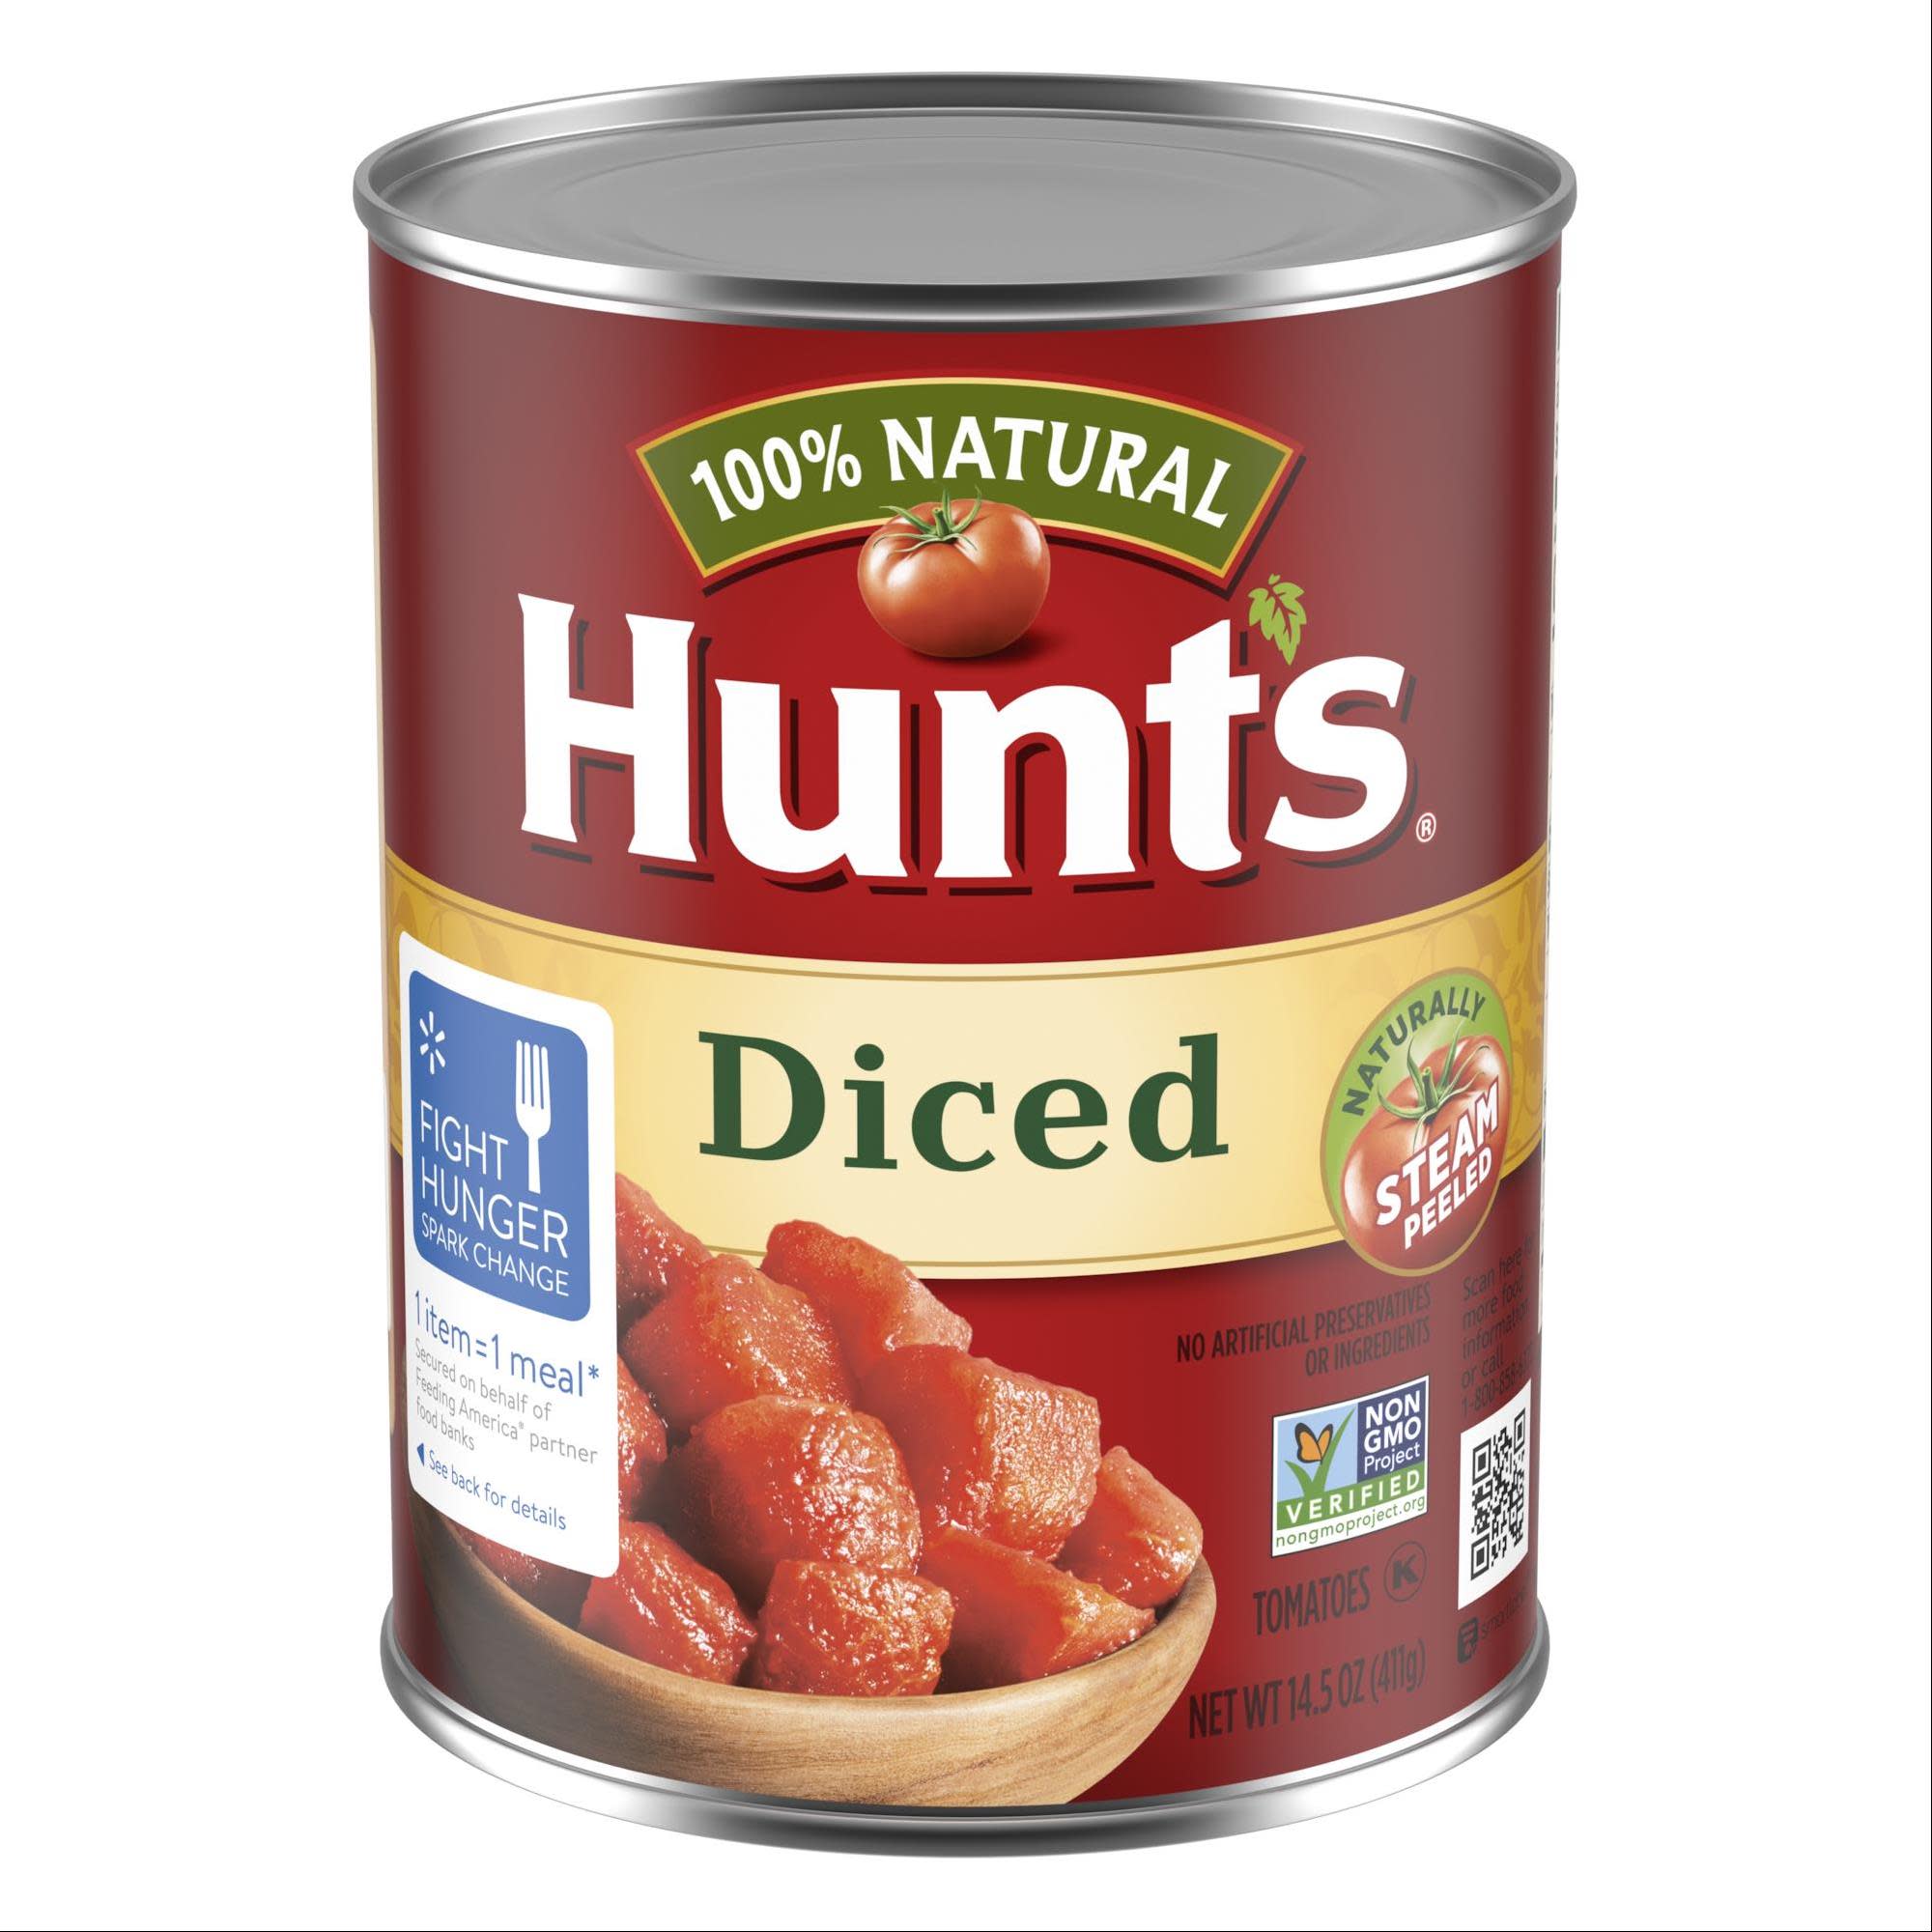 Hunt's Diced Tomatoes, 14.5 oz Can - image 1 of 10